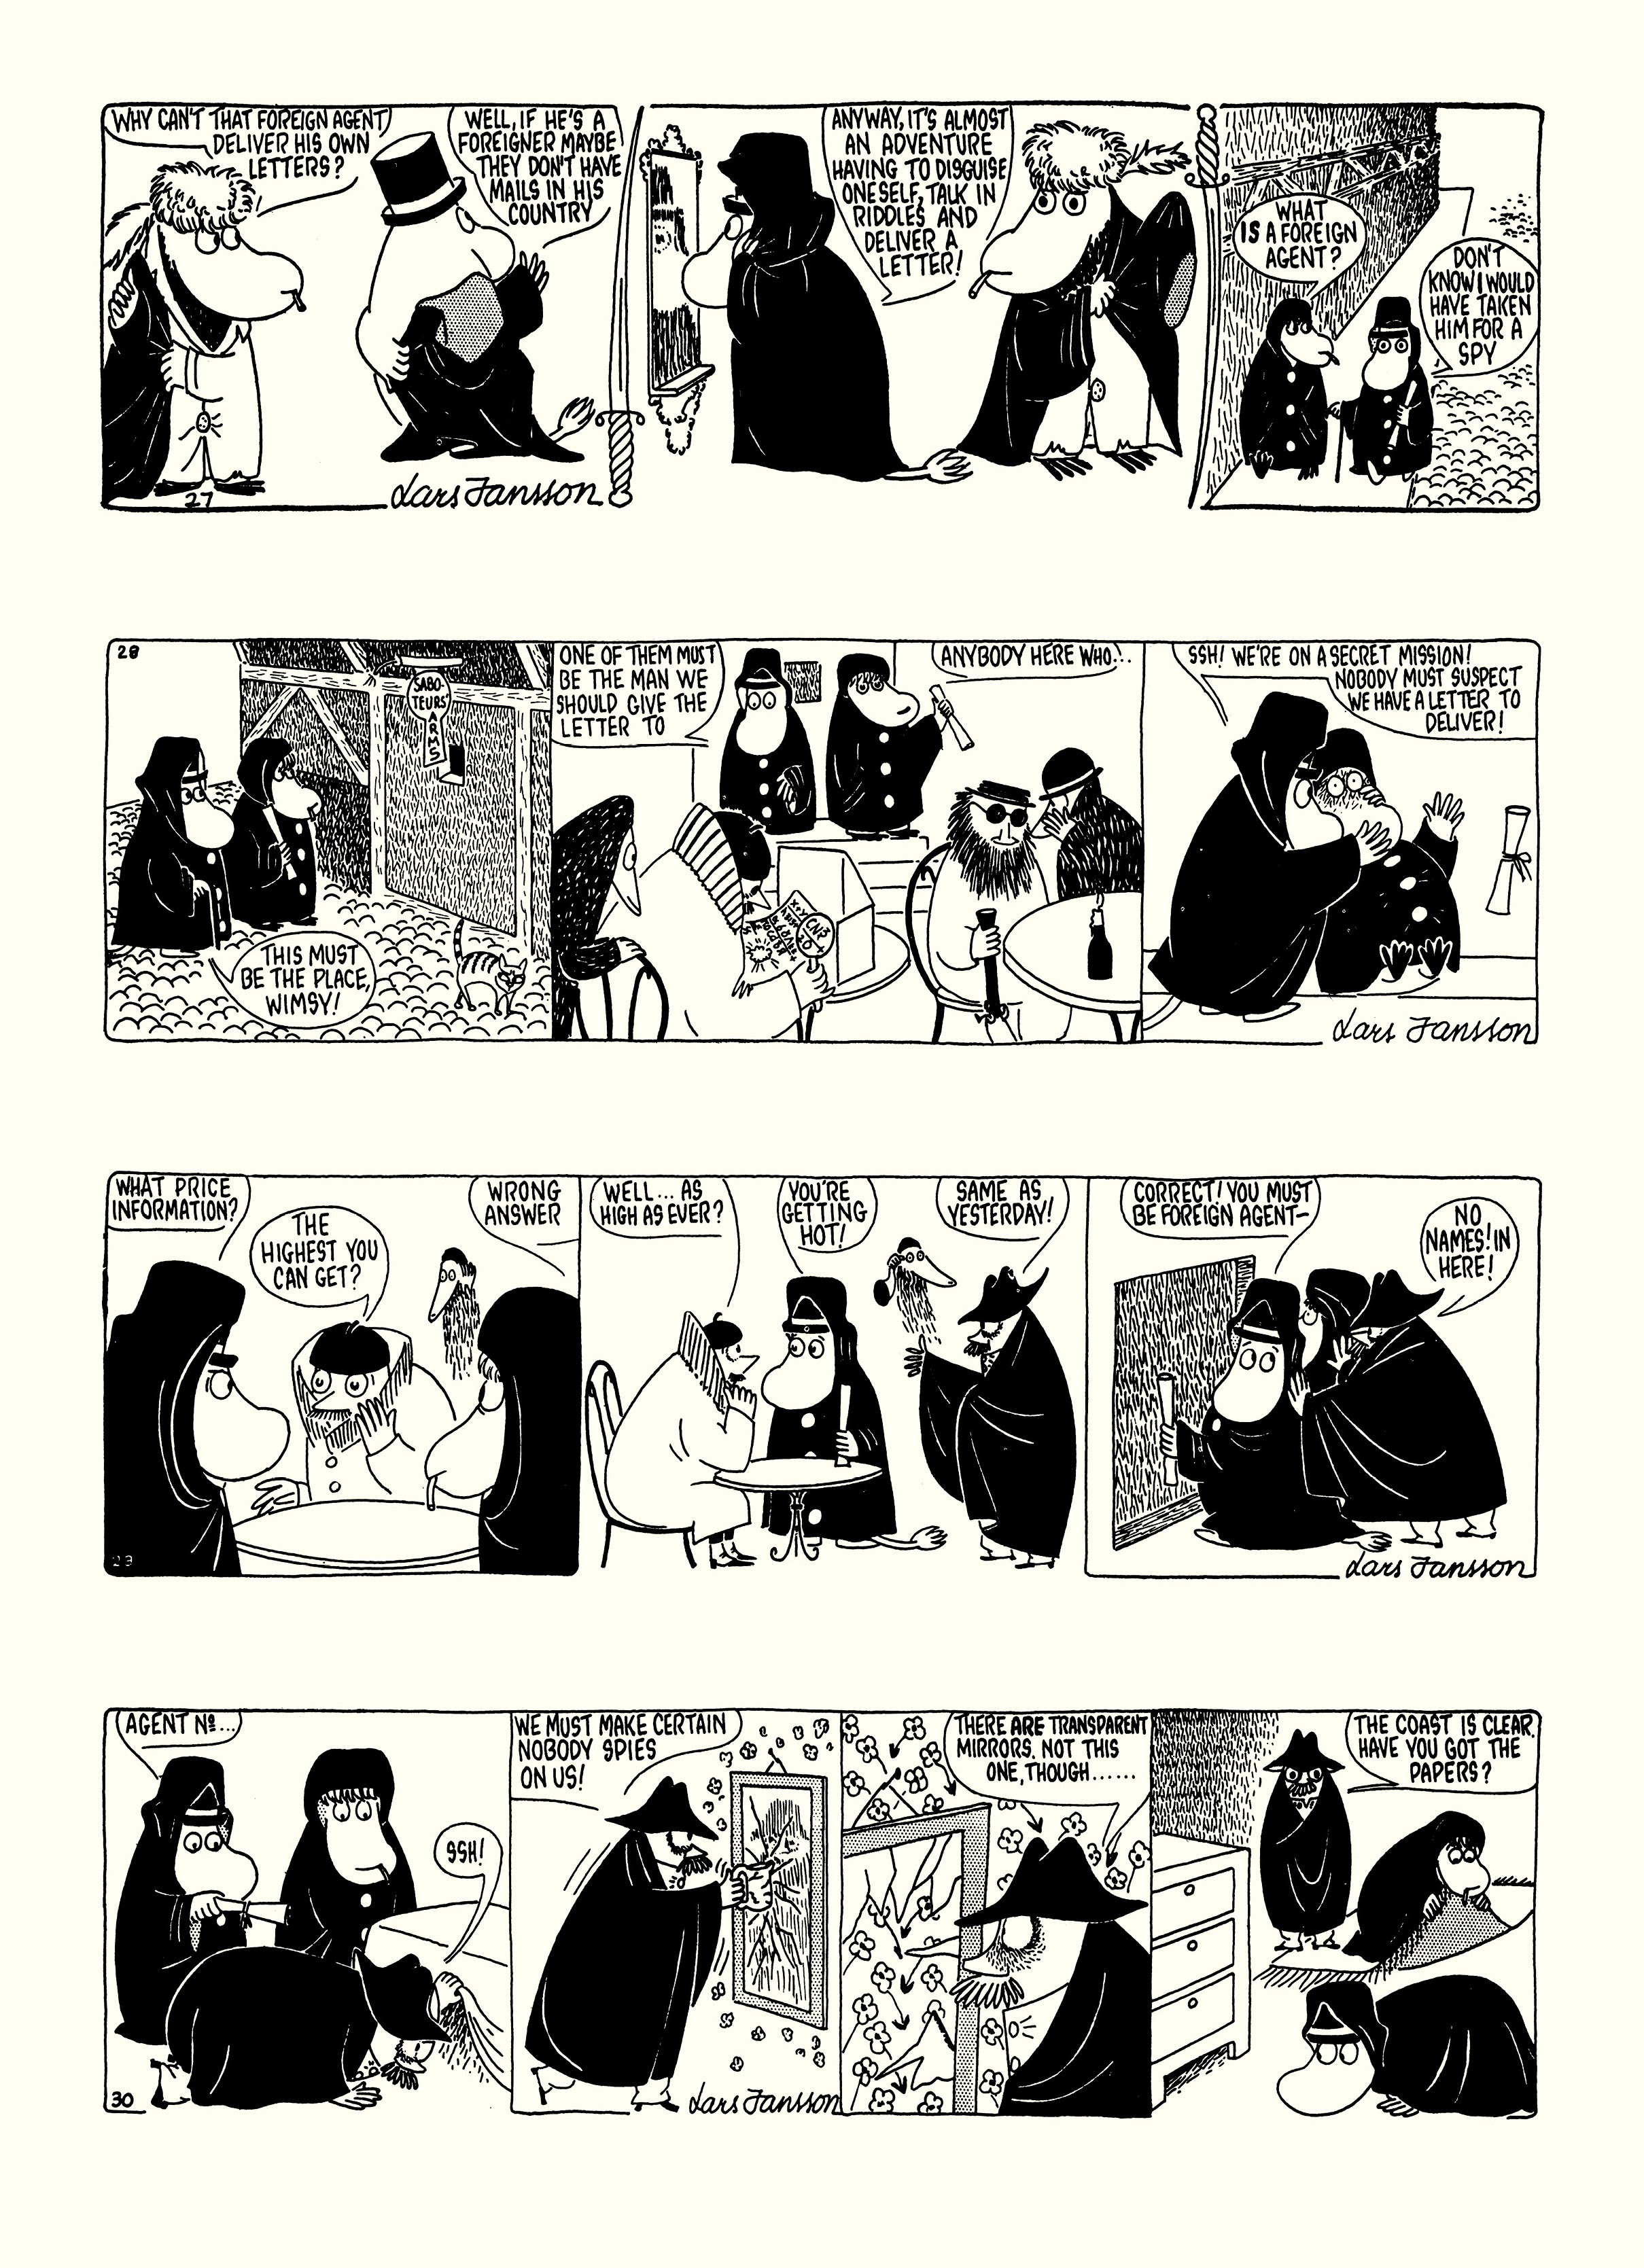 Read online Moomin: The Complete Lars Jansson Comic Strip comic -  Issue # TPB 6 - 54